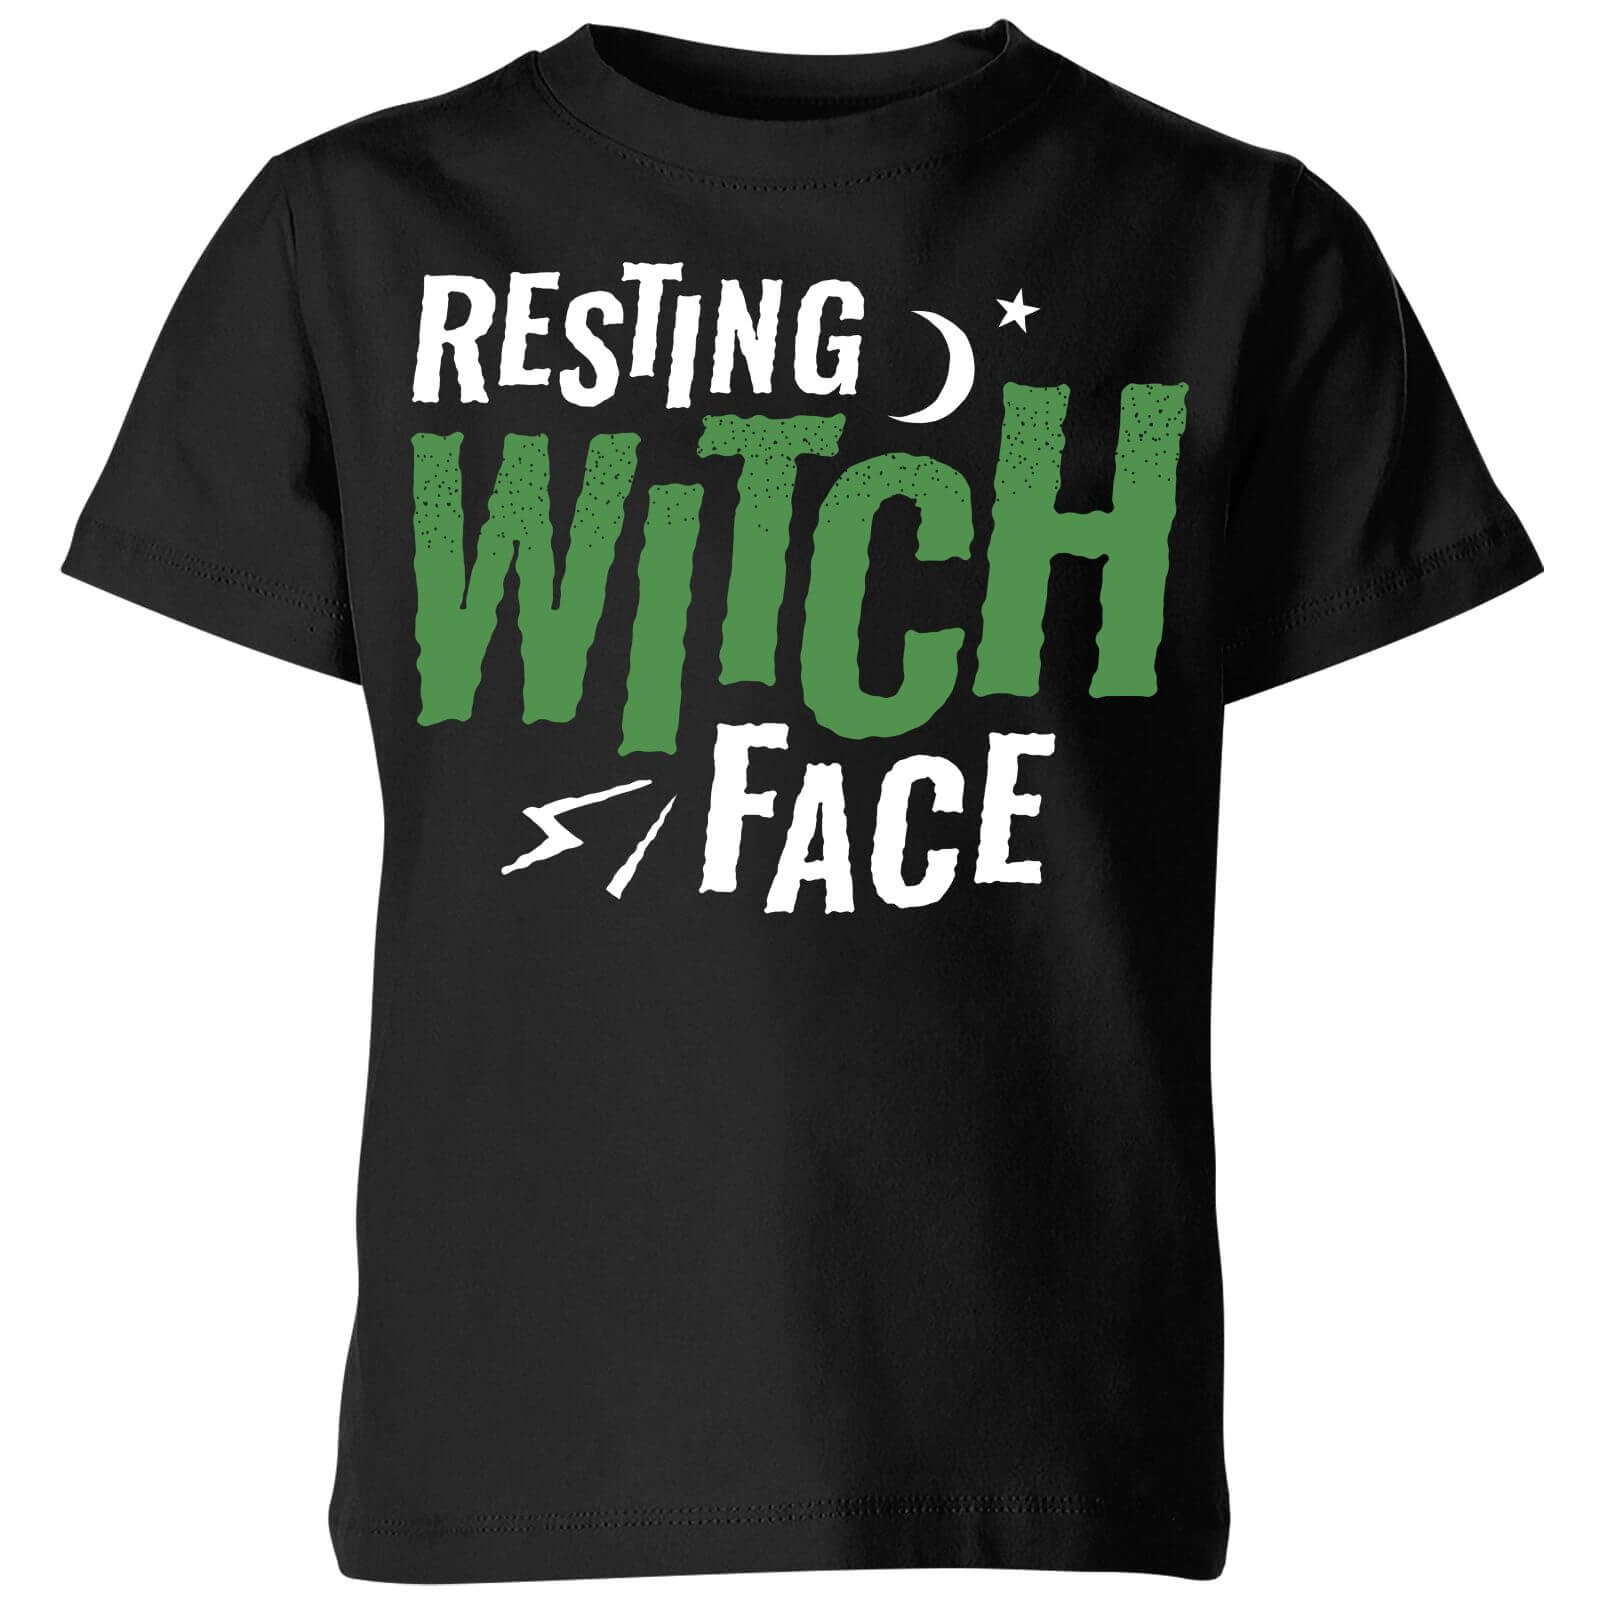 Resting Witch Face Kids' T-Shirt - Black - 3-4 Years - Black